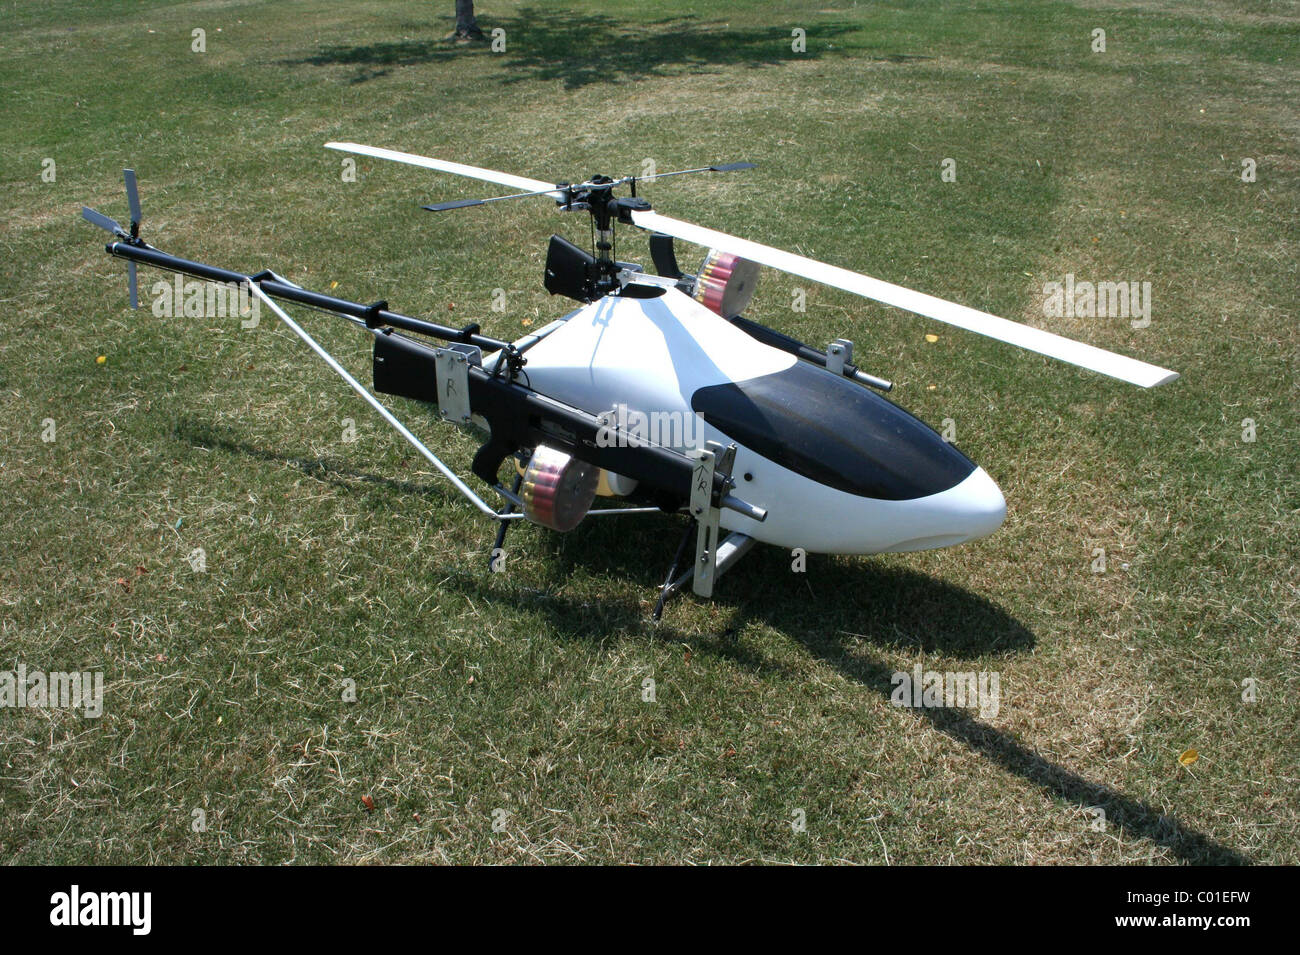 AutoCopter Gunship This is not a toy. Meet the remote-controlled, fully  armed, unmanned mini-helicopter called the AutoCopter Stock Photo - Alamy